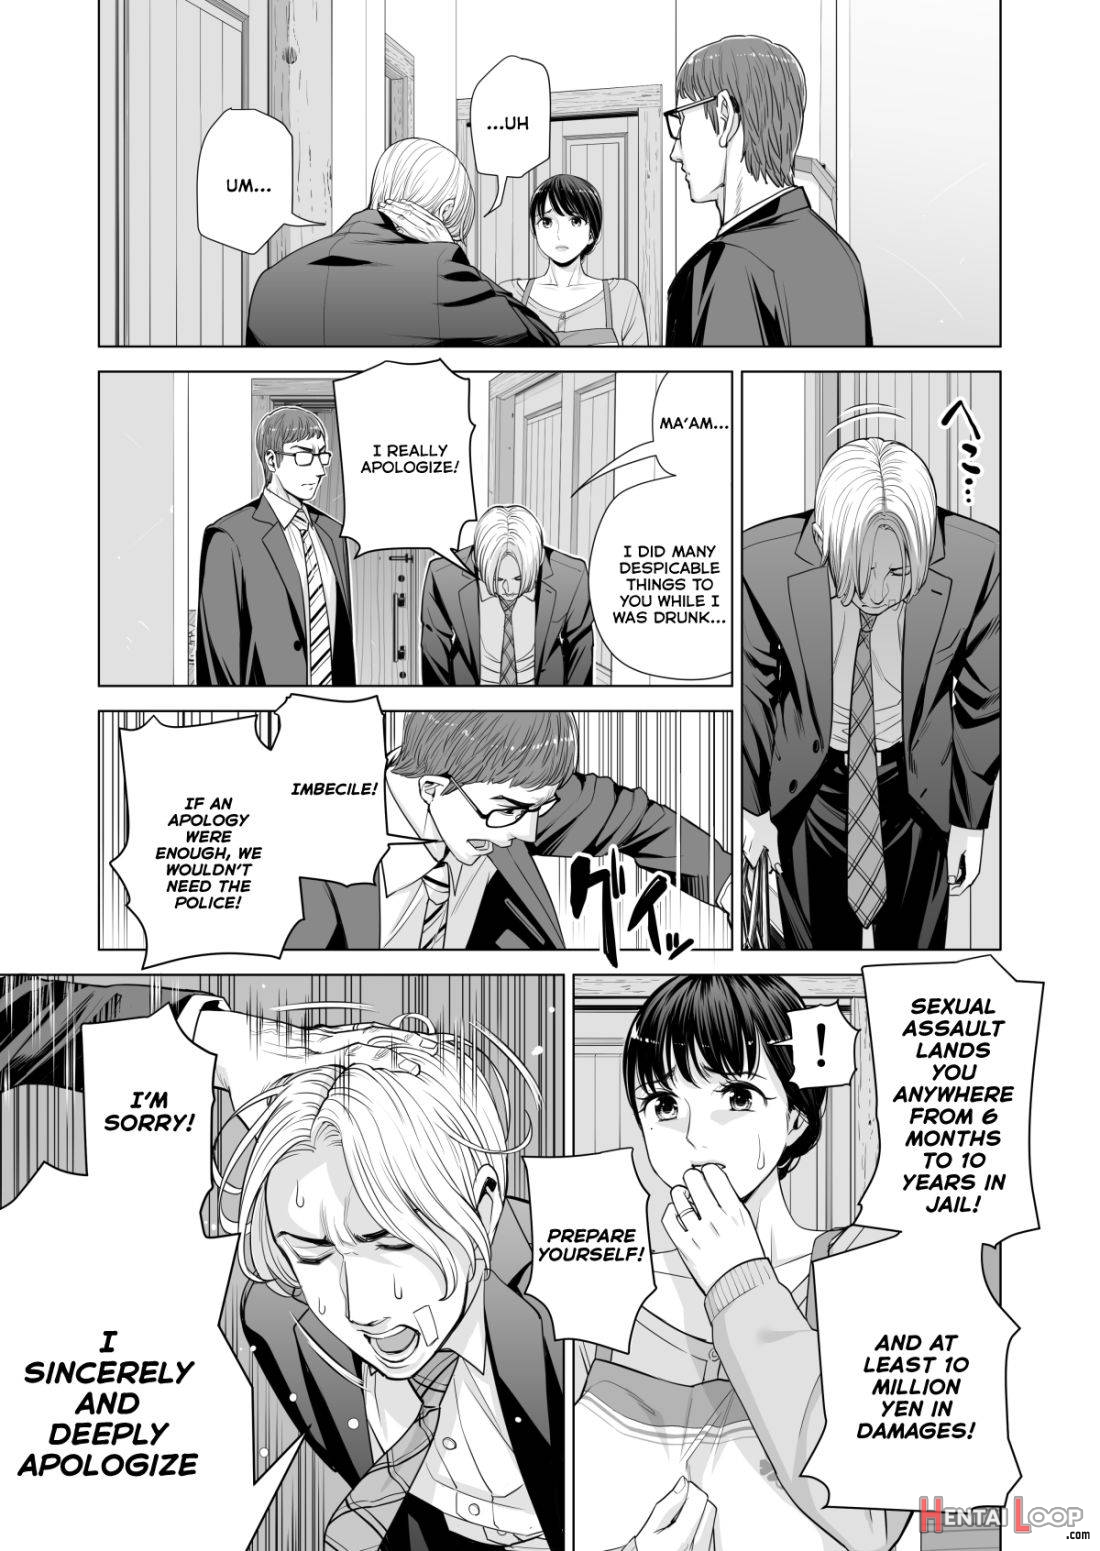 Tsukiyo no Midare Zake (Kouhen) Moonlit Intoxication ~ A Housewife Stolen by a Coworker Besides her Blackout Drunk Husband ~ Chapter 2 page 26